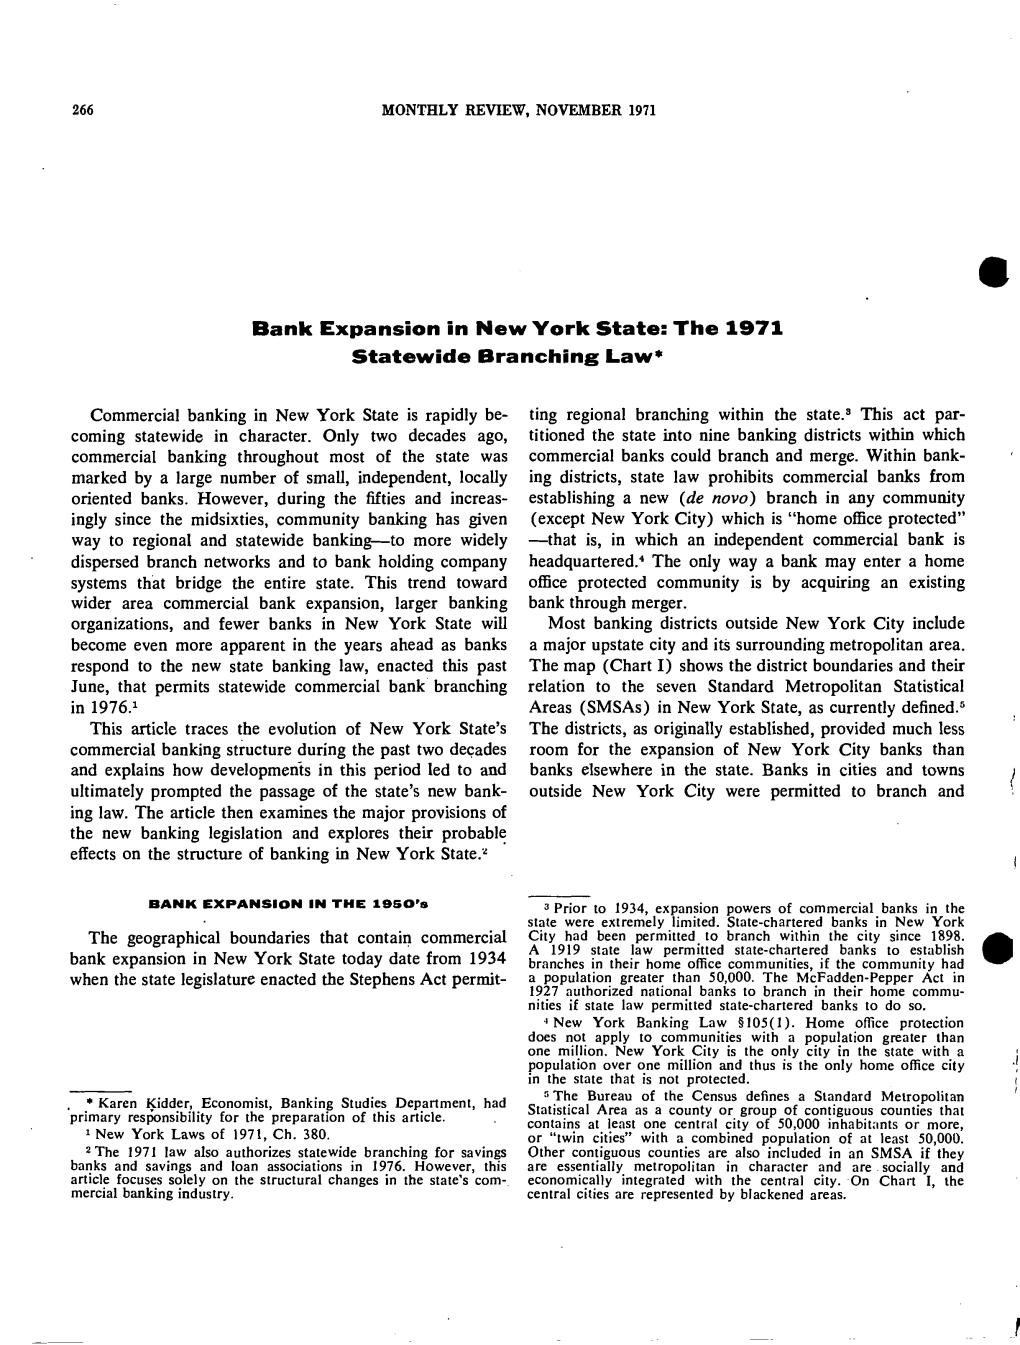 Bank Expansion in New York State: the 1971 Statewide Branching Law*